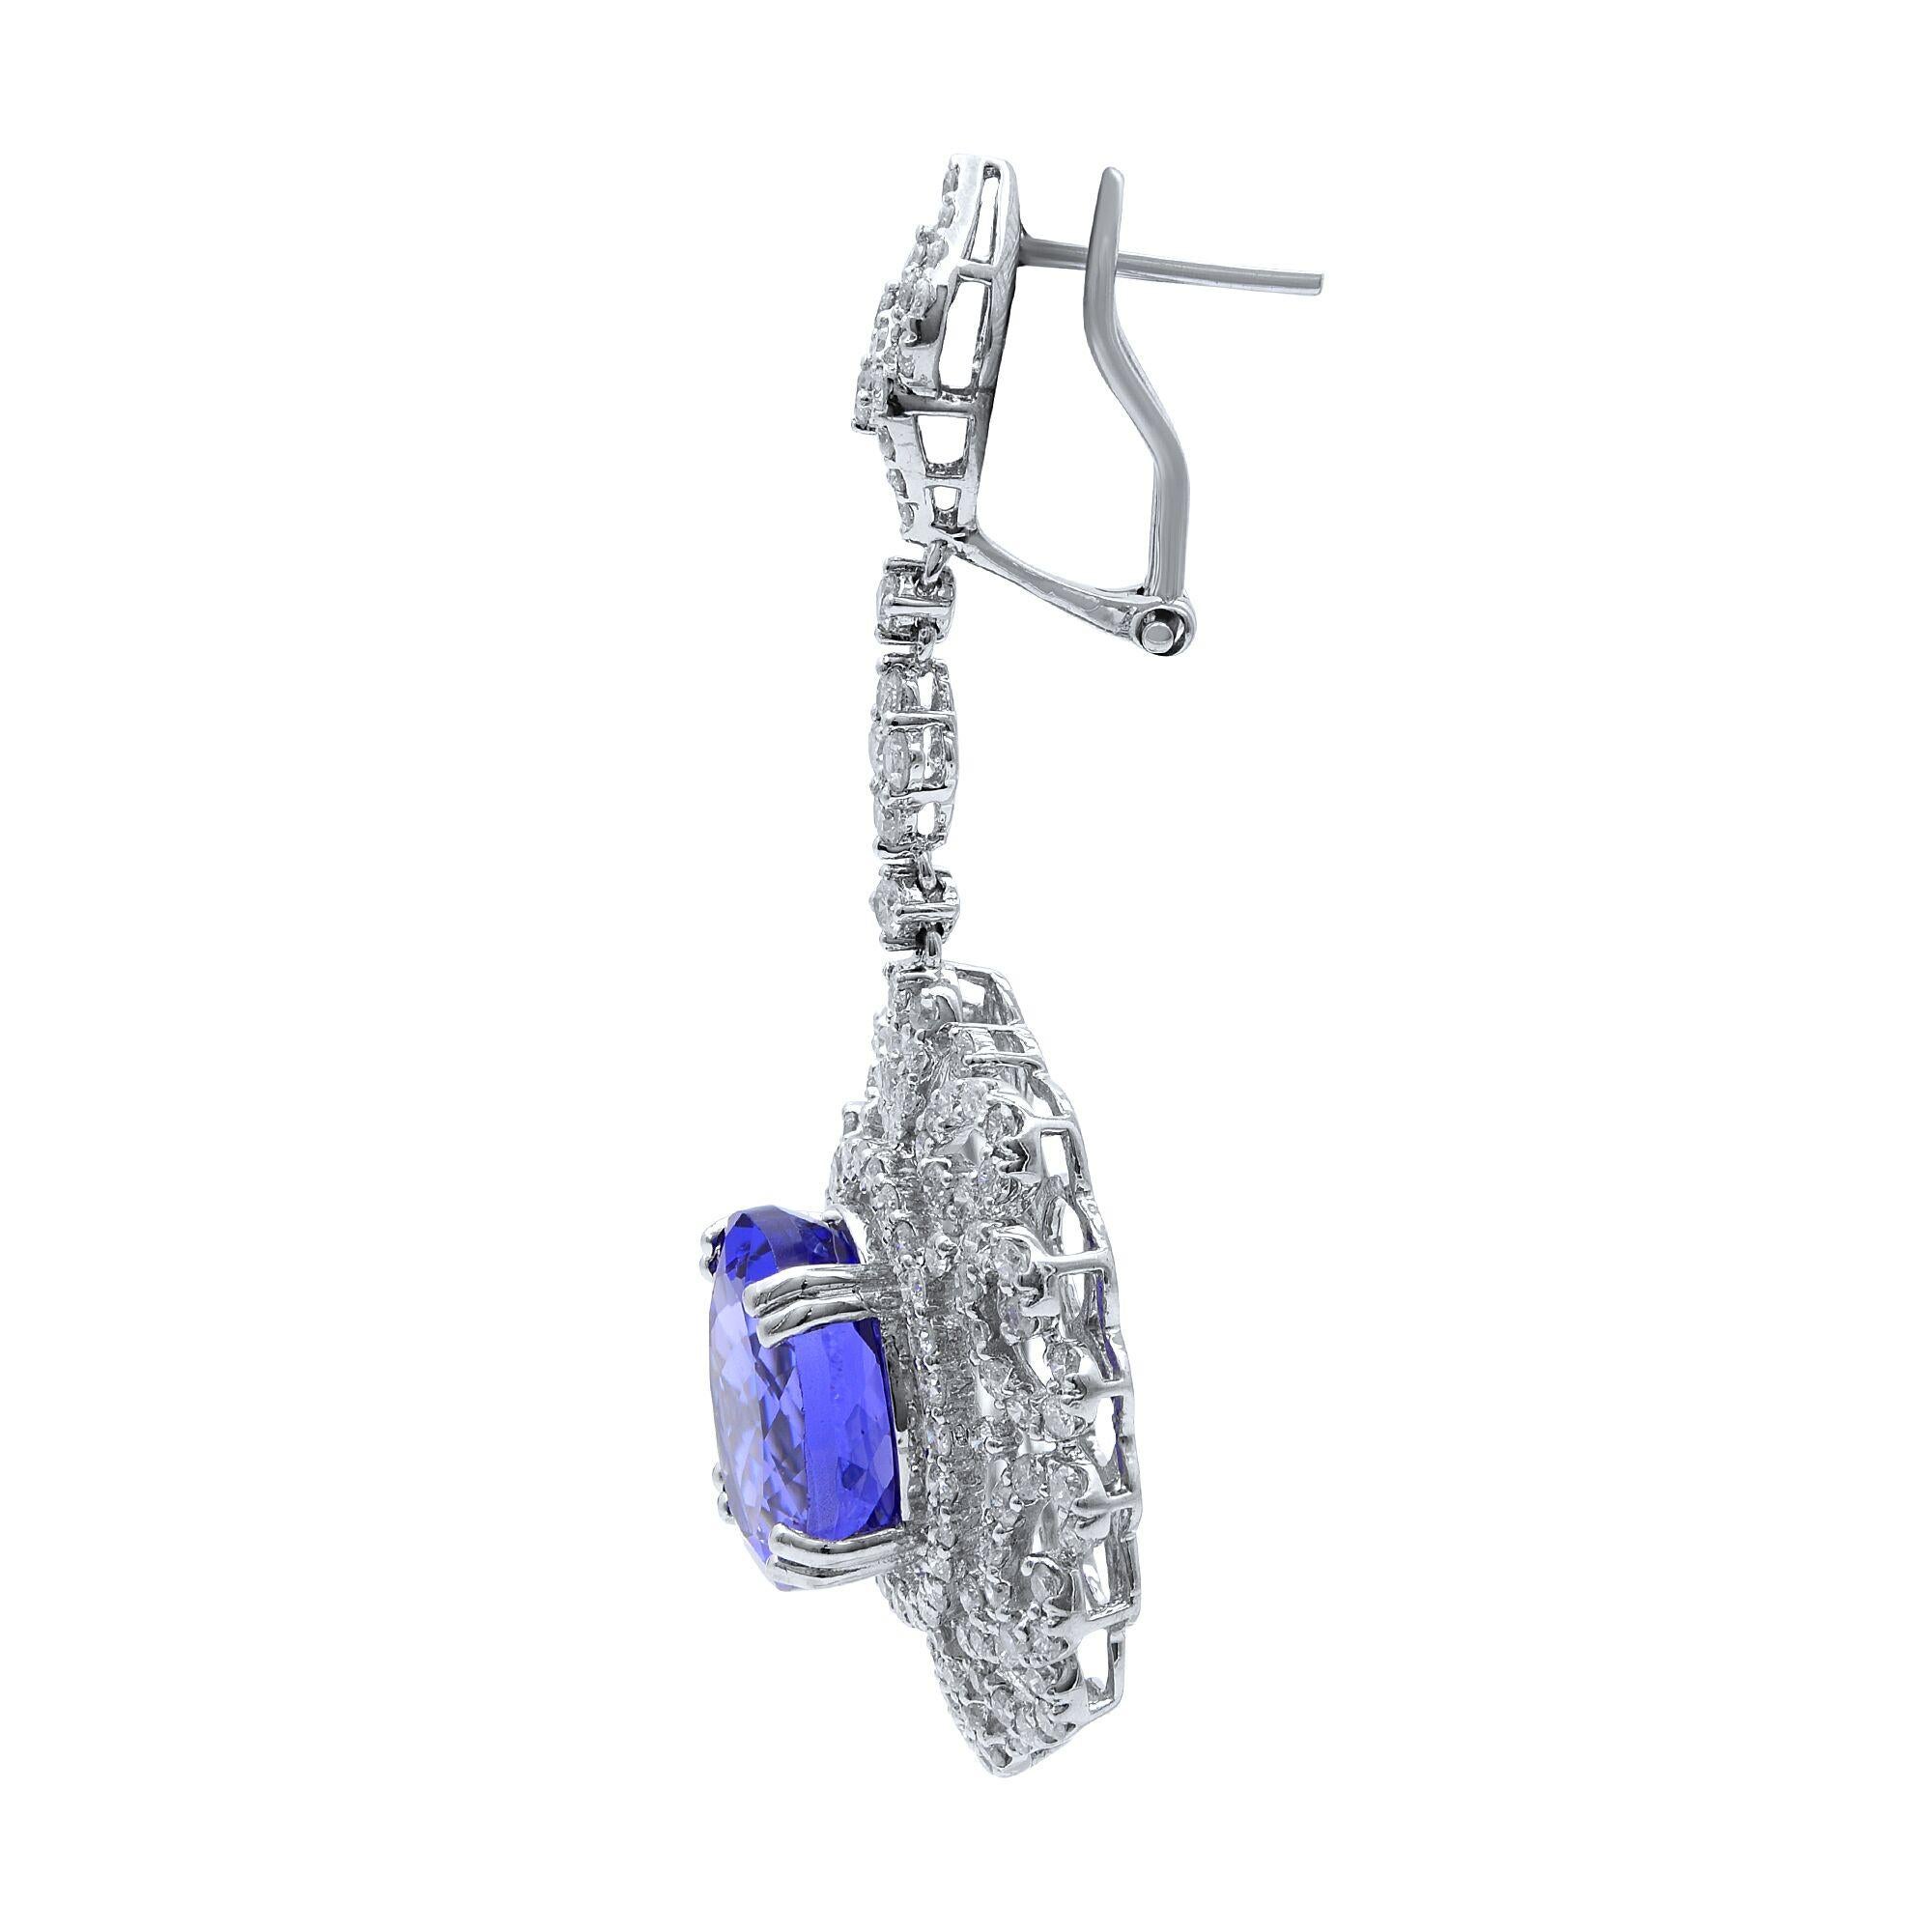 Tanzanite Diamond Chandelier Drop Earrings 18K White Gold 

Measuring an impressive 2 inches long, these fabulous tanzanite and diamond drop chandalier earrings look as though they were taken straight from a palace oil portrait. Magnificently hand